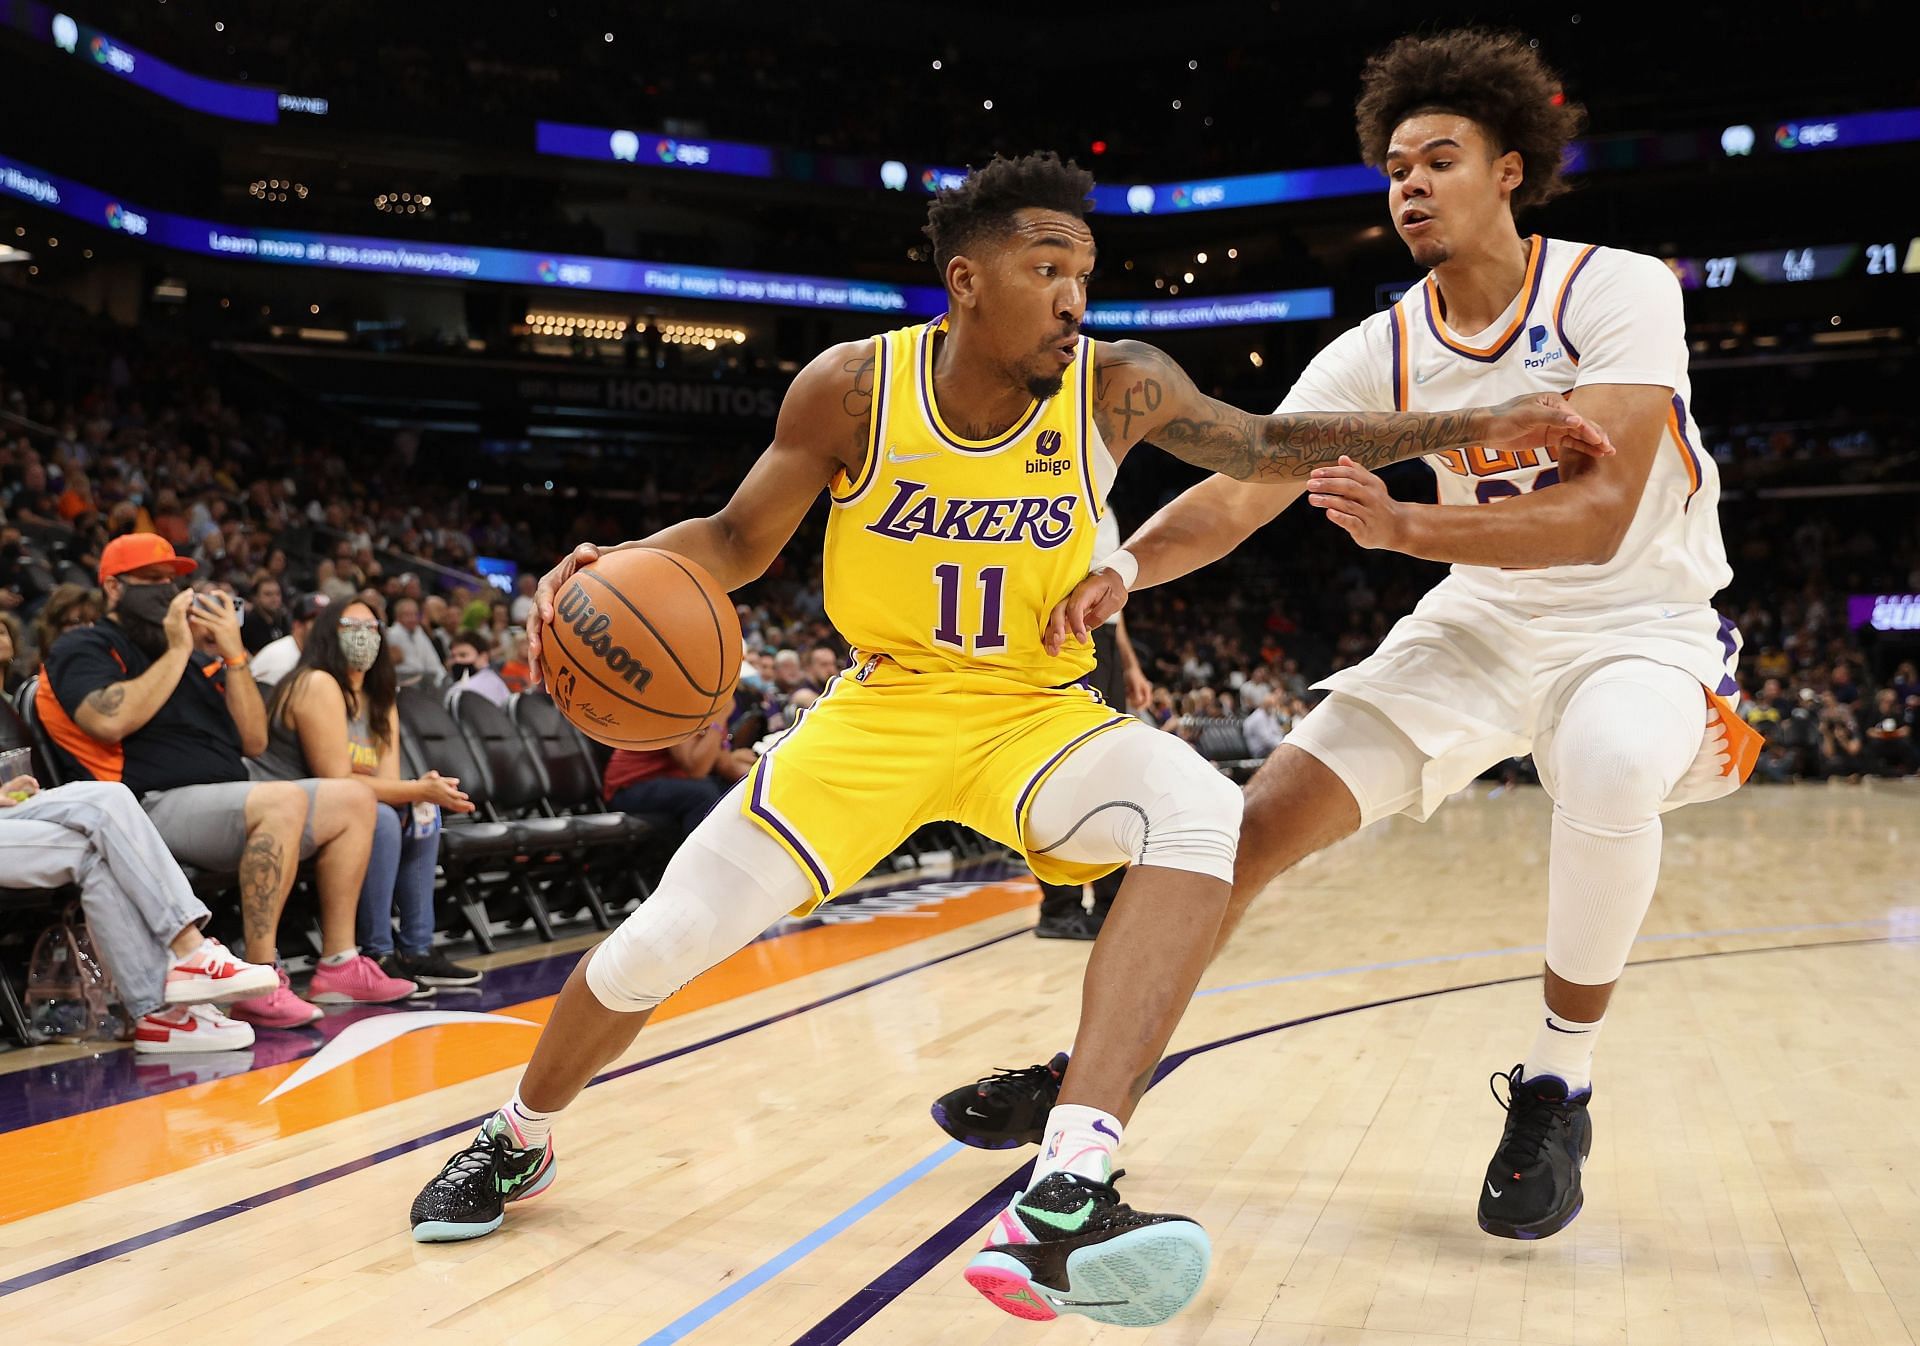 Malik Monk looks to drive to the basket for the LA Lakers.